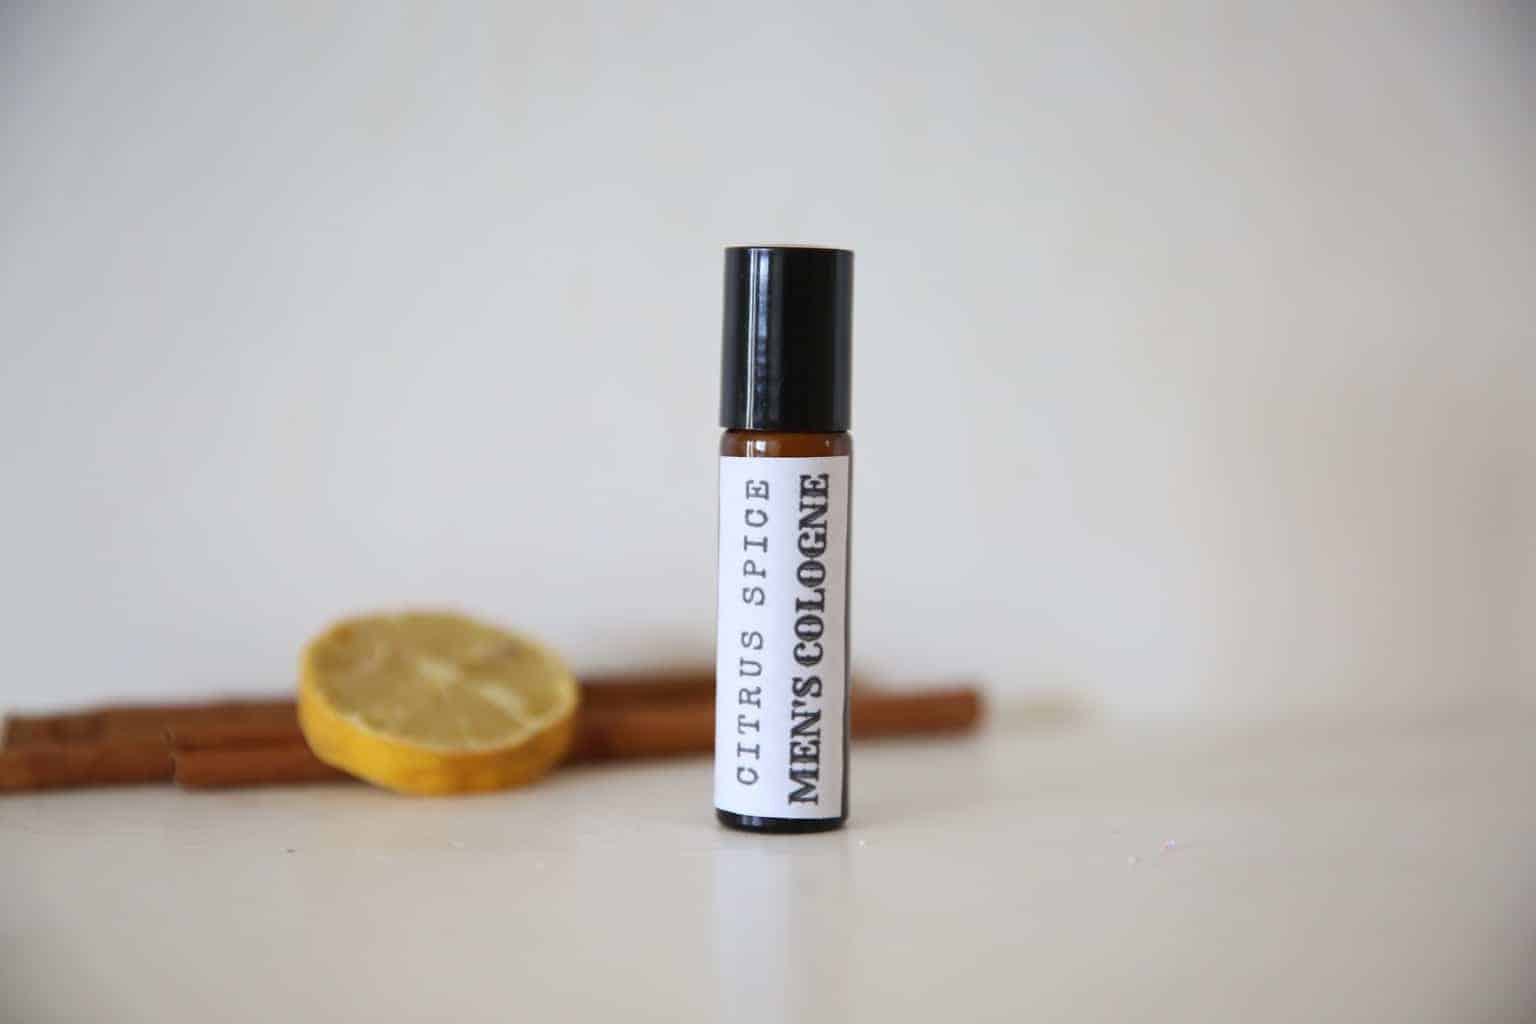 Homemade mens cologne in 10ml roller bottle. with dried lemon and cinnamon stick